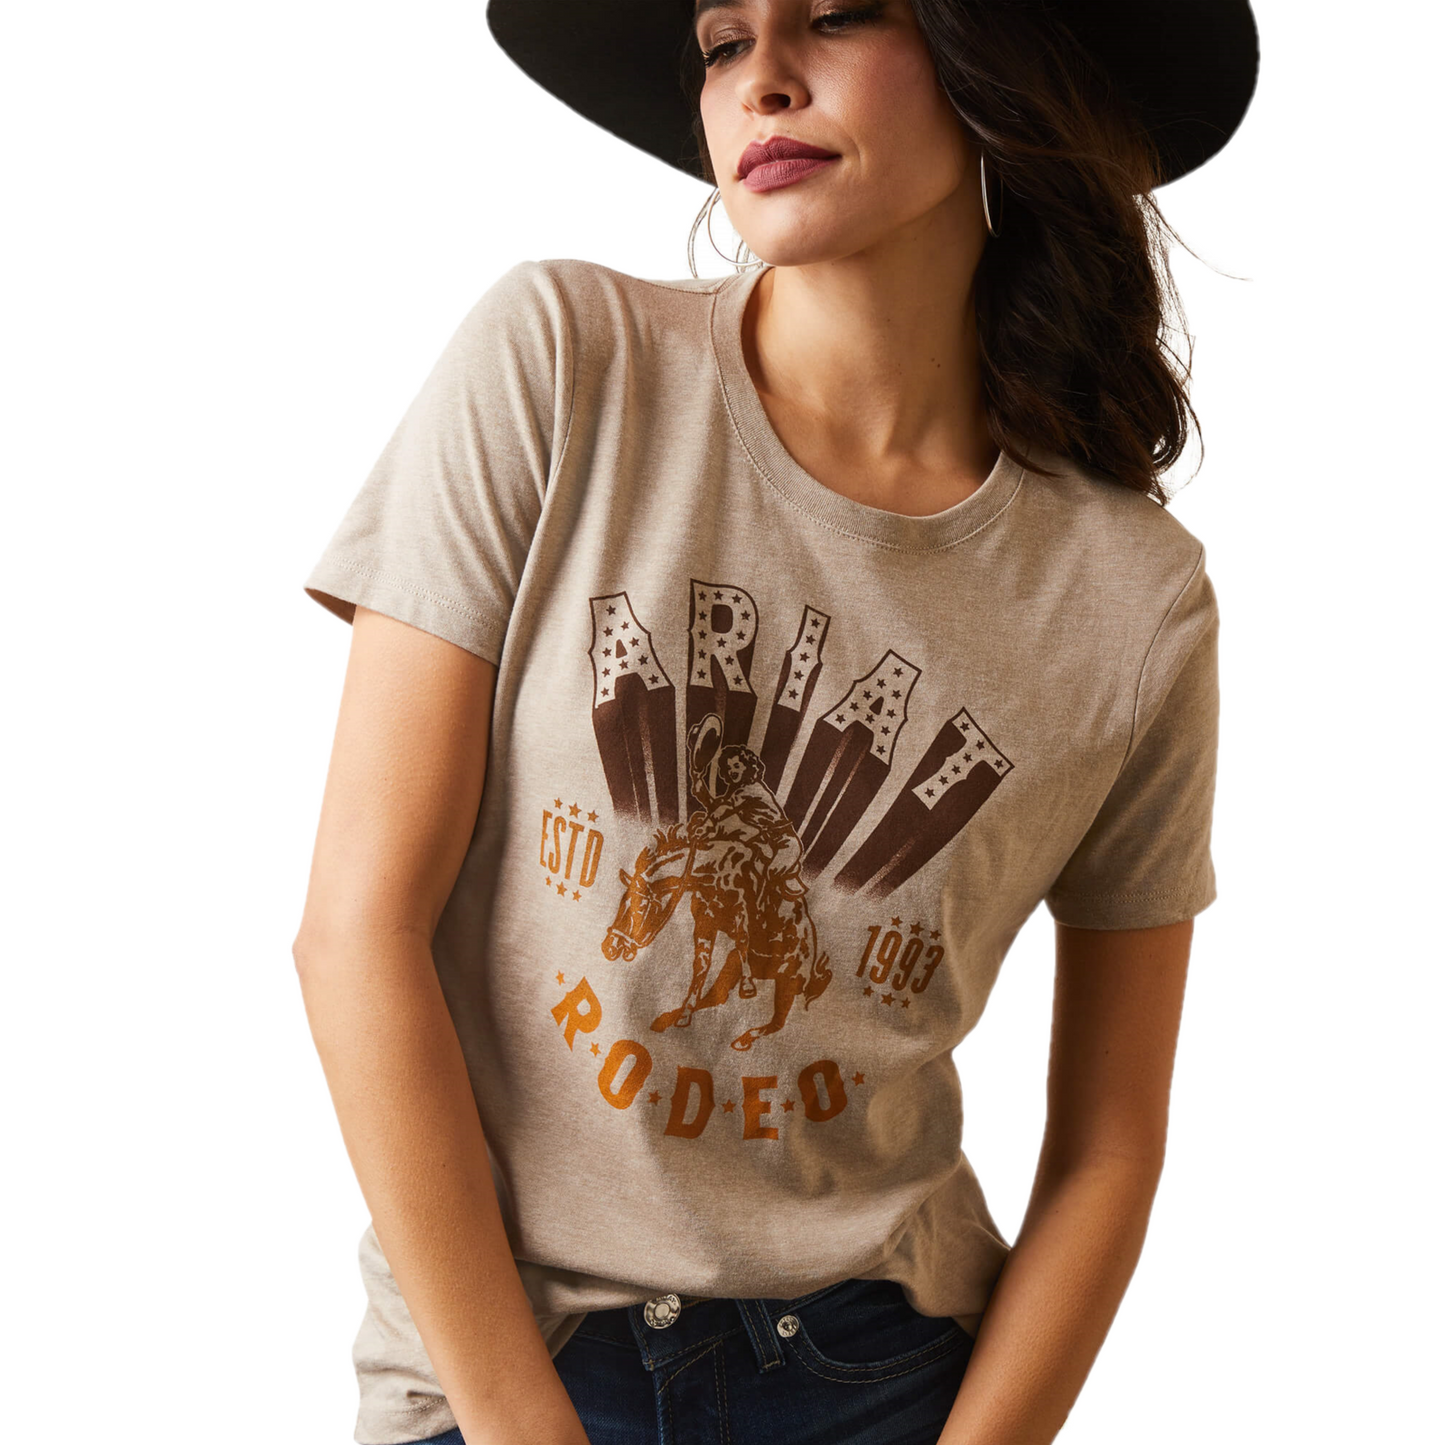 Ariat® Ladies Vintage Rodeo Oatmeal Heather Graphic T-Shirt 10044615